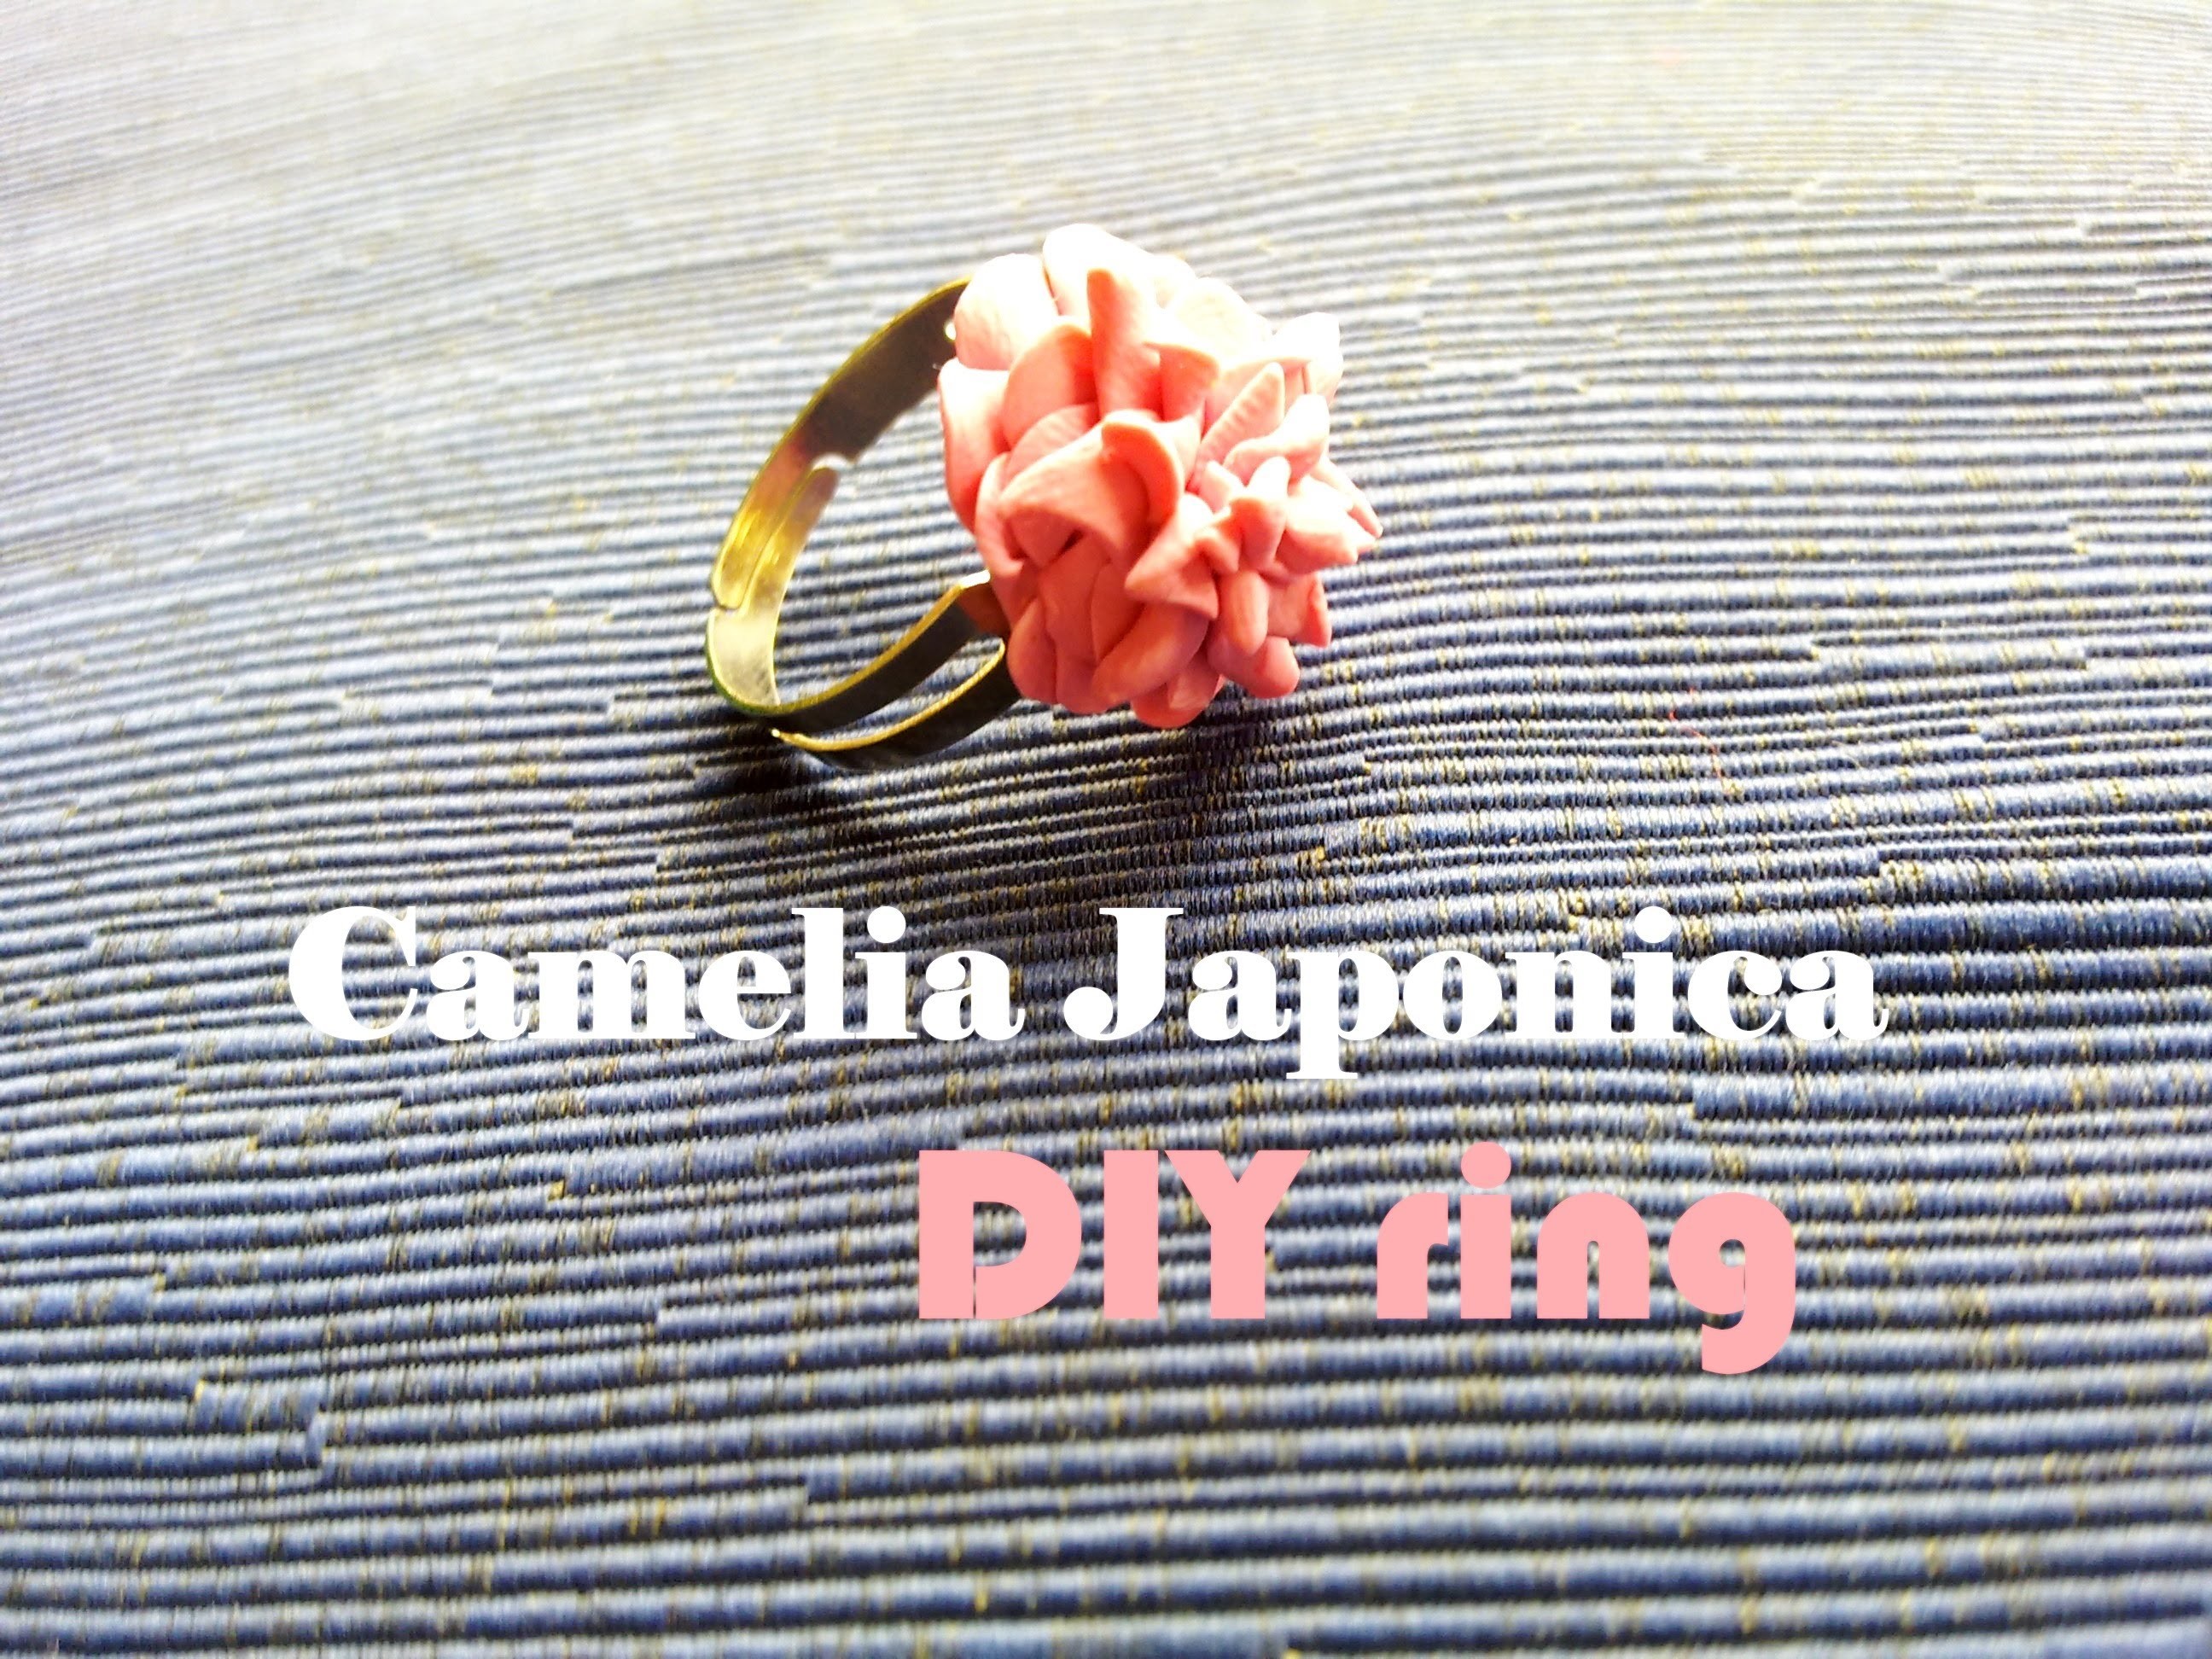 Camelia Japonica "Anello" ❀ Camellia Japonica - DIY Ring in Polymer Clay ✿ Tutorial